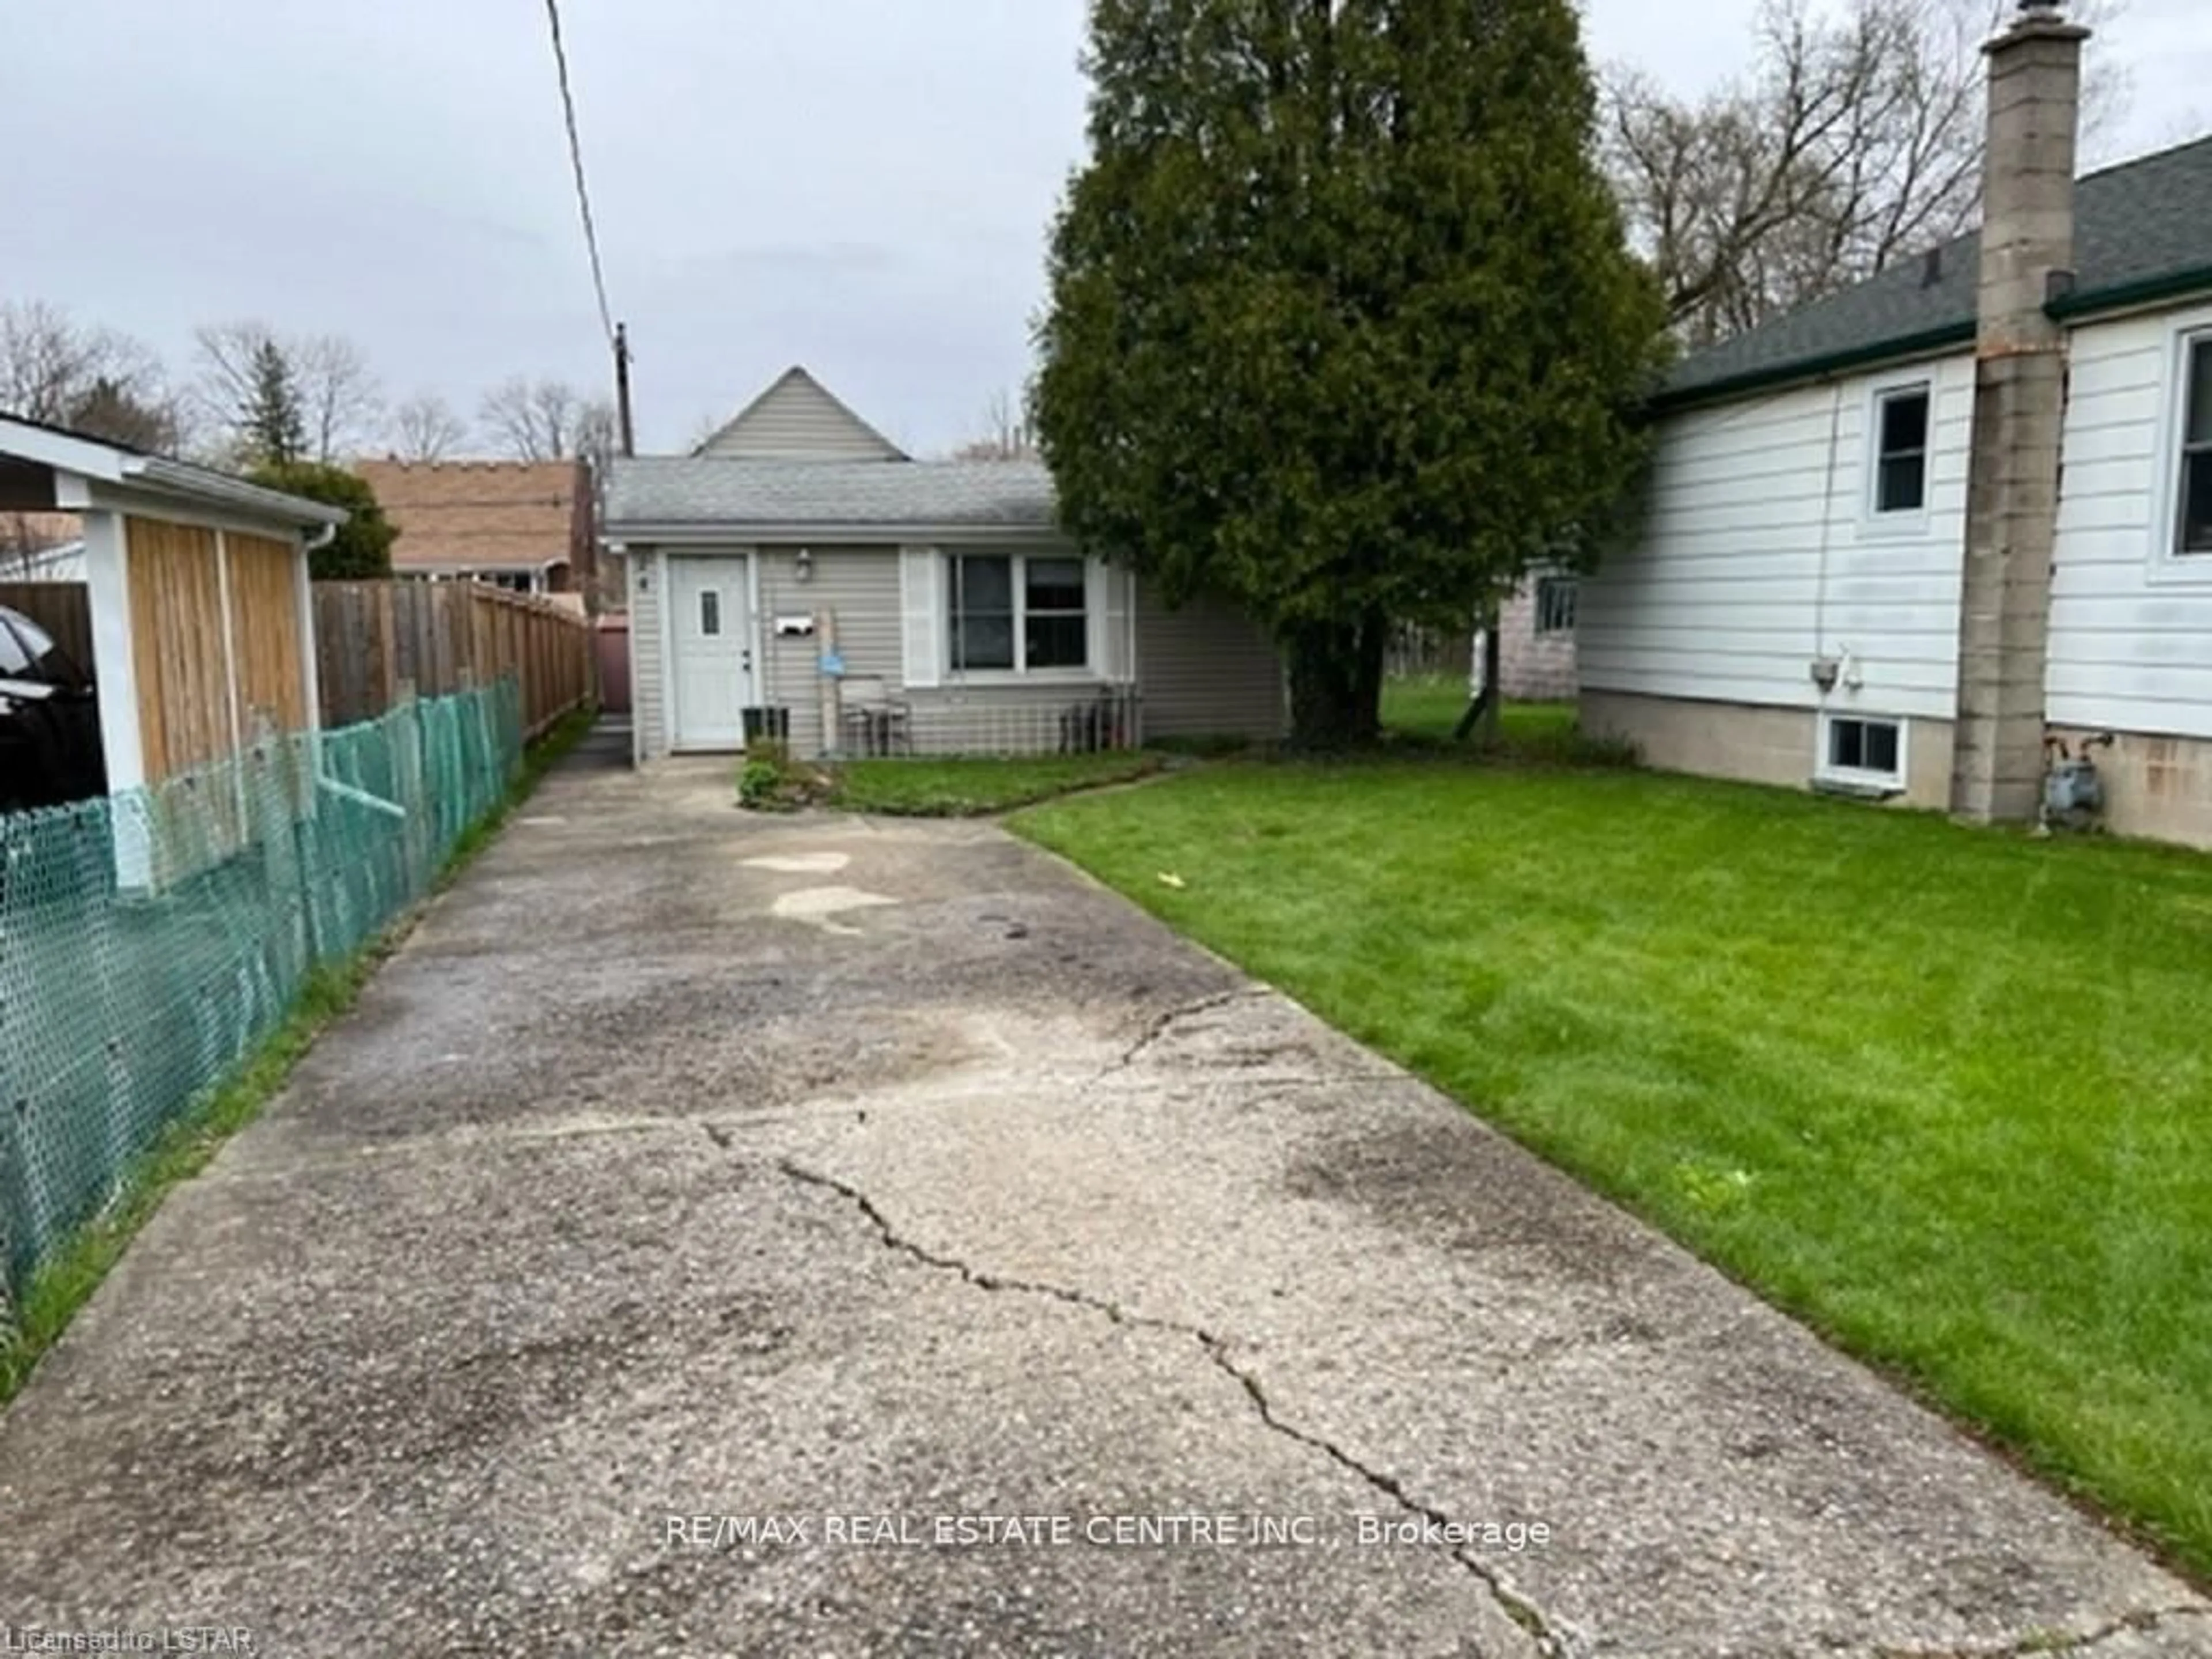 Frontside or backside of a home for 24 Appel St, London Ontario N5Y 1P9